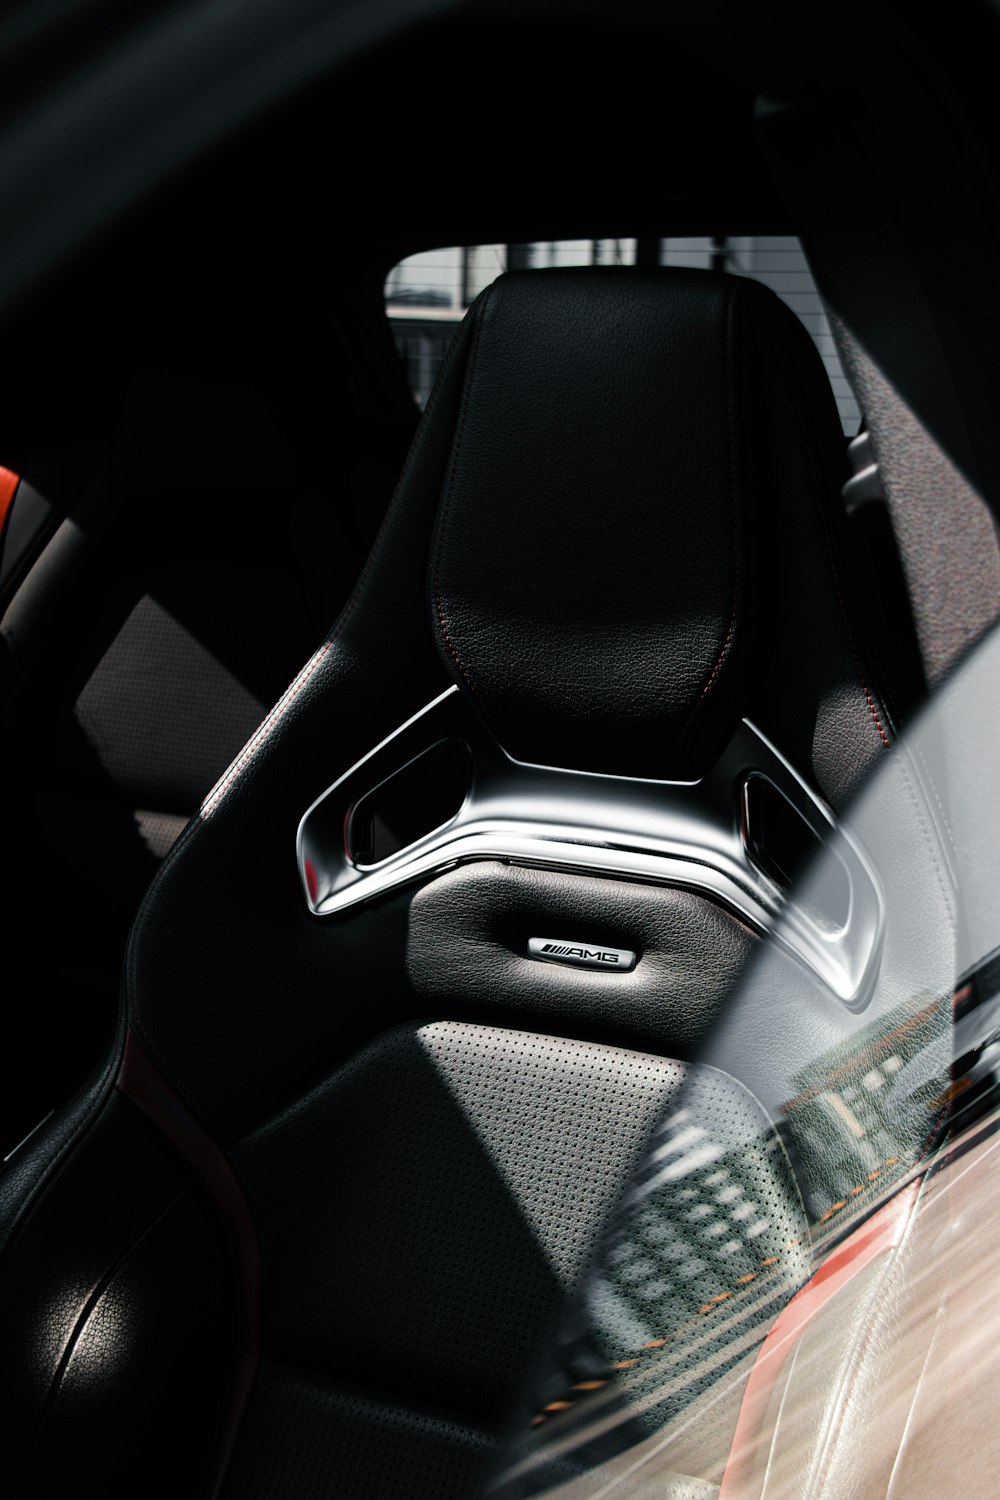 a close up of a car's interior with a steering wheel